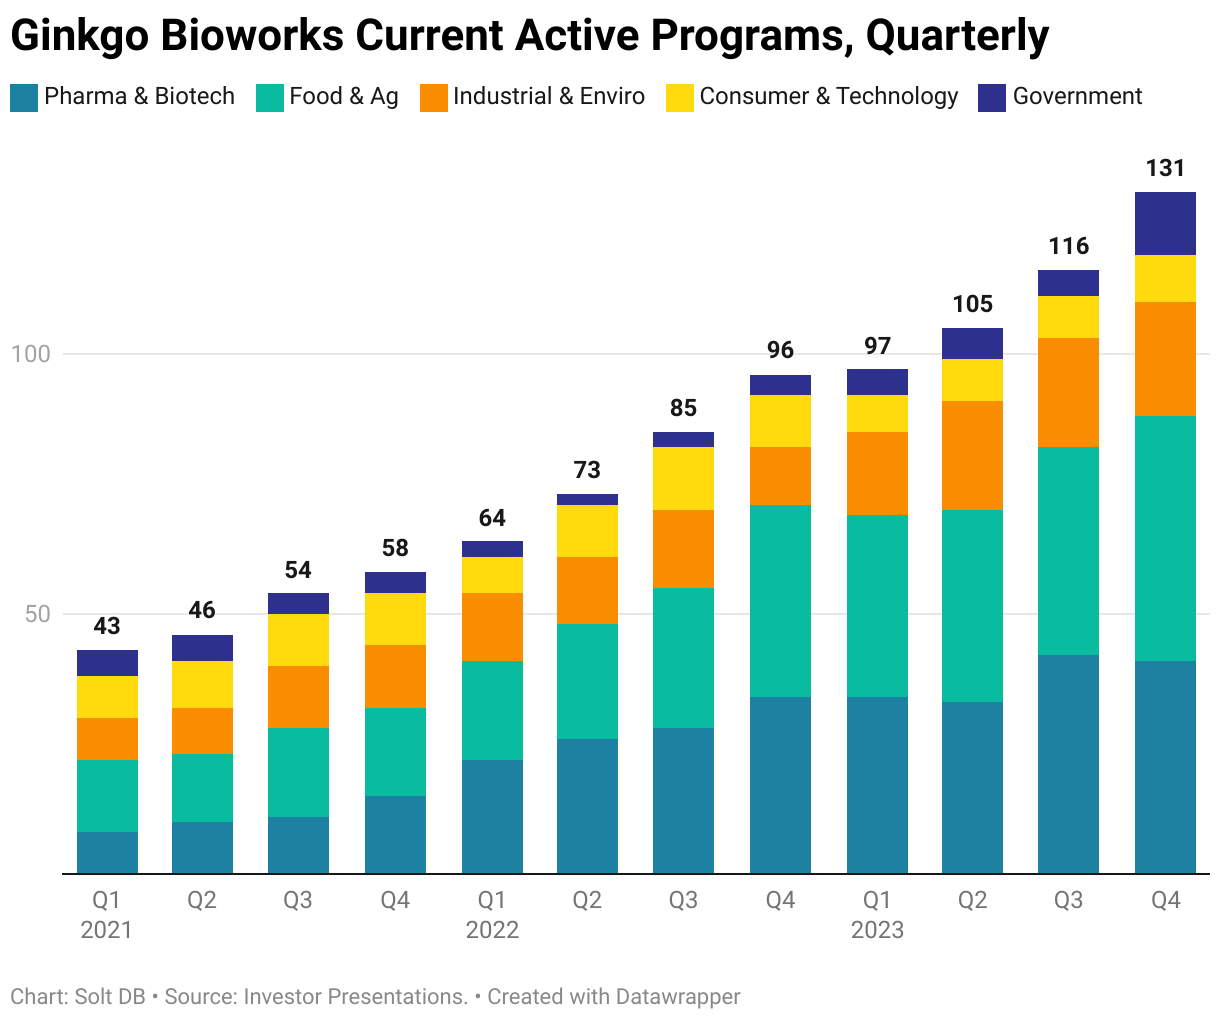 A stacked bar chart showing current active programs at Ginkgo Bioworks from the first quarter of 2021 to the fourth quarter of 2023.